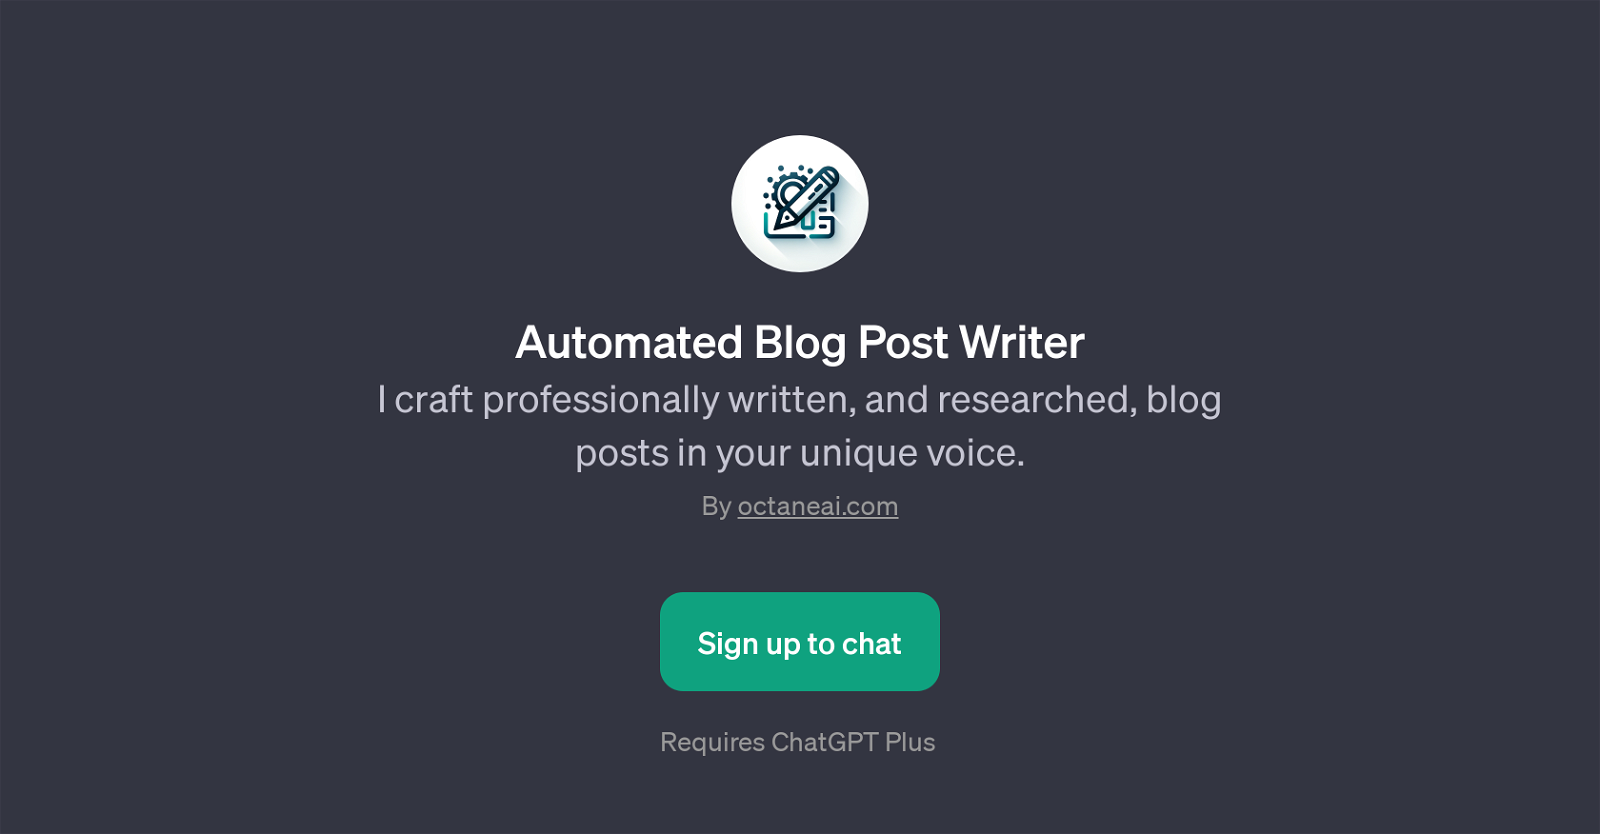 Automated Blog Post Writer website